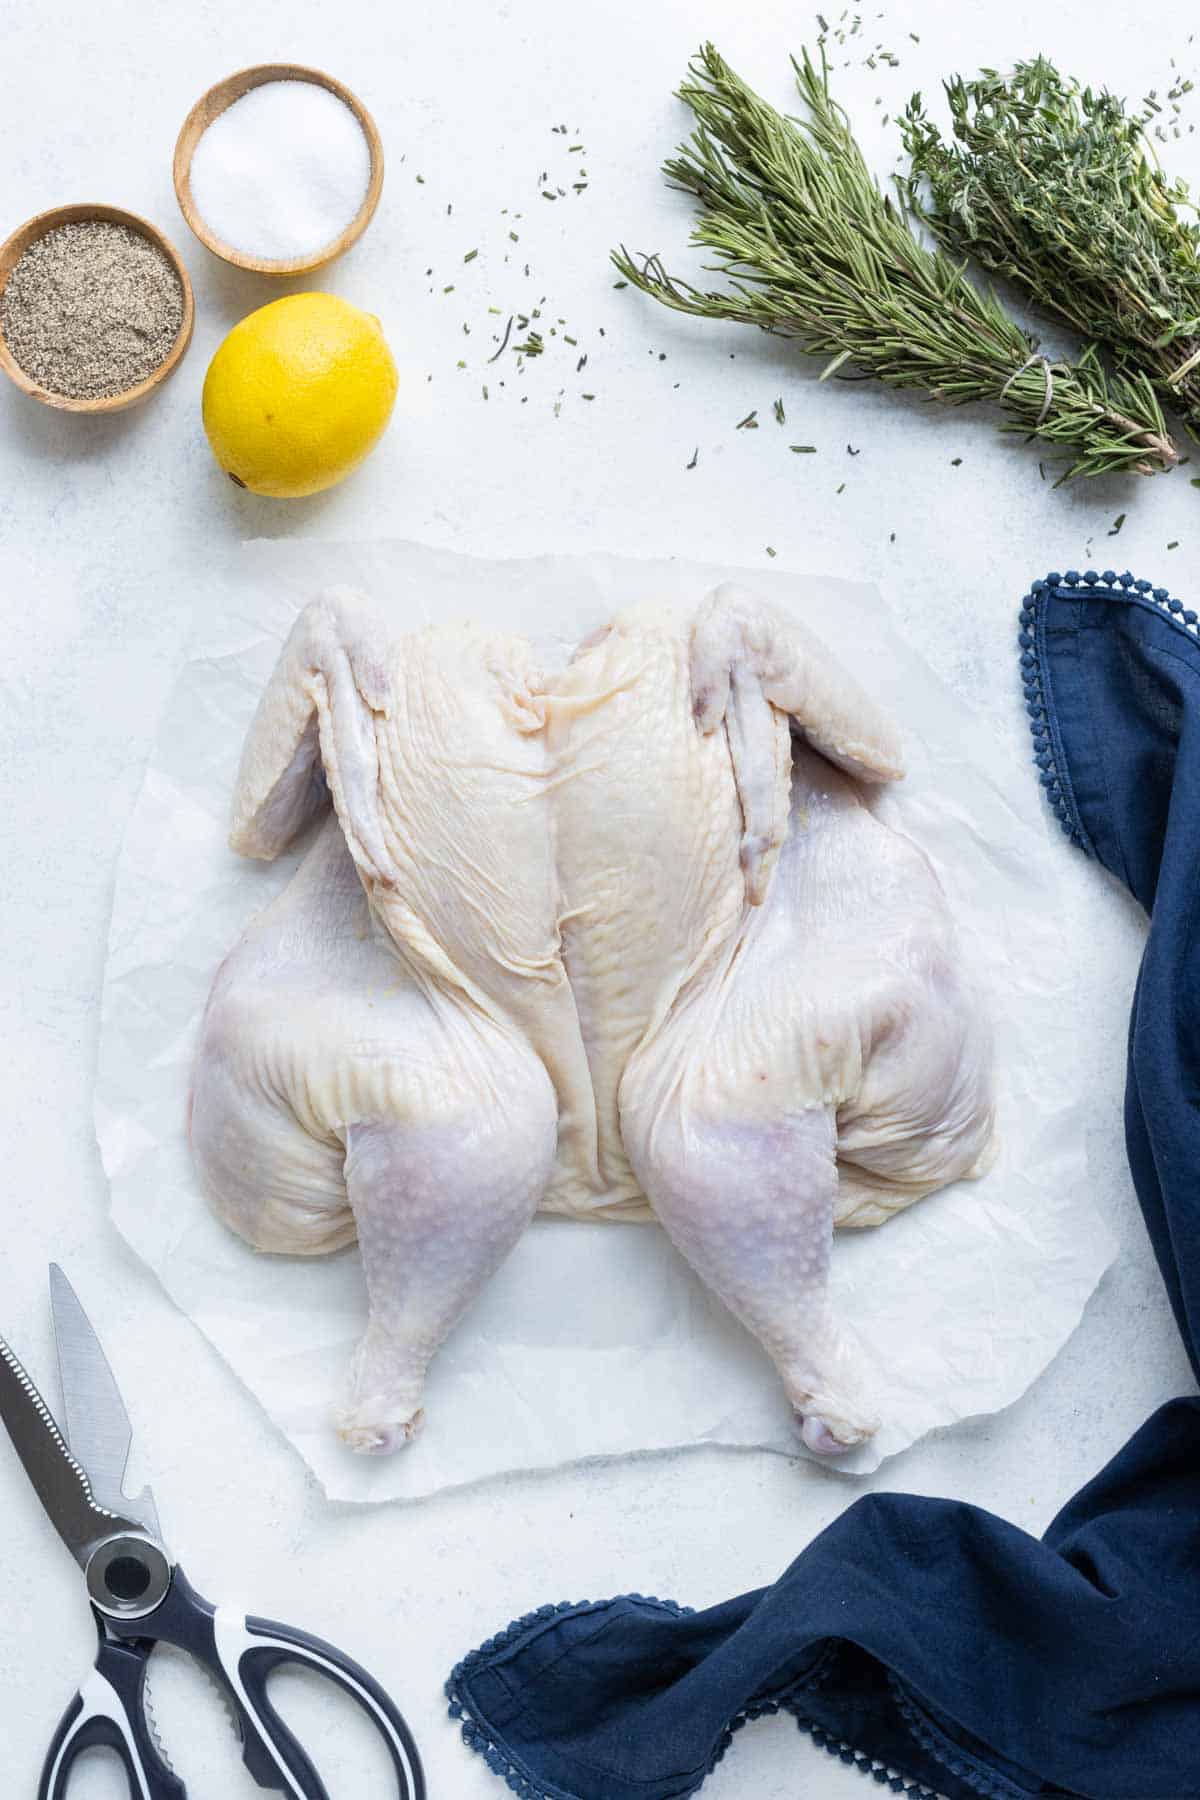 A spatchcock chicken is ready to season and bake.